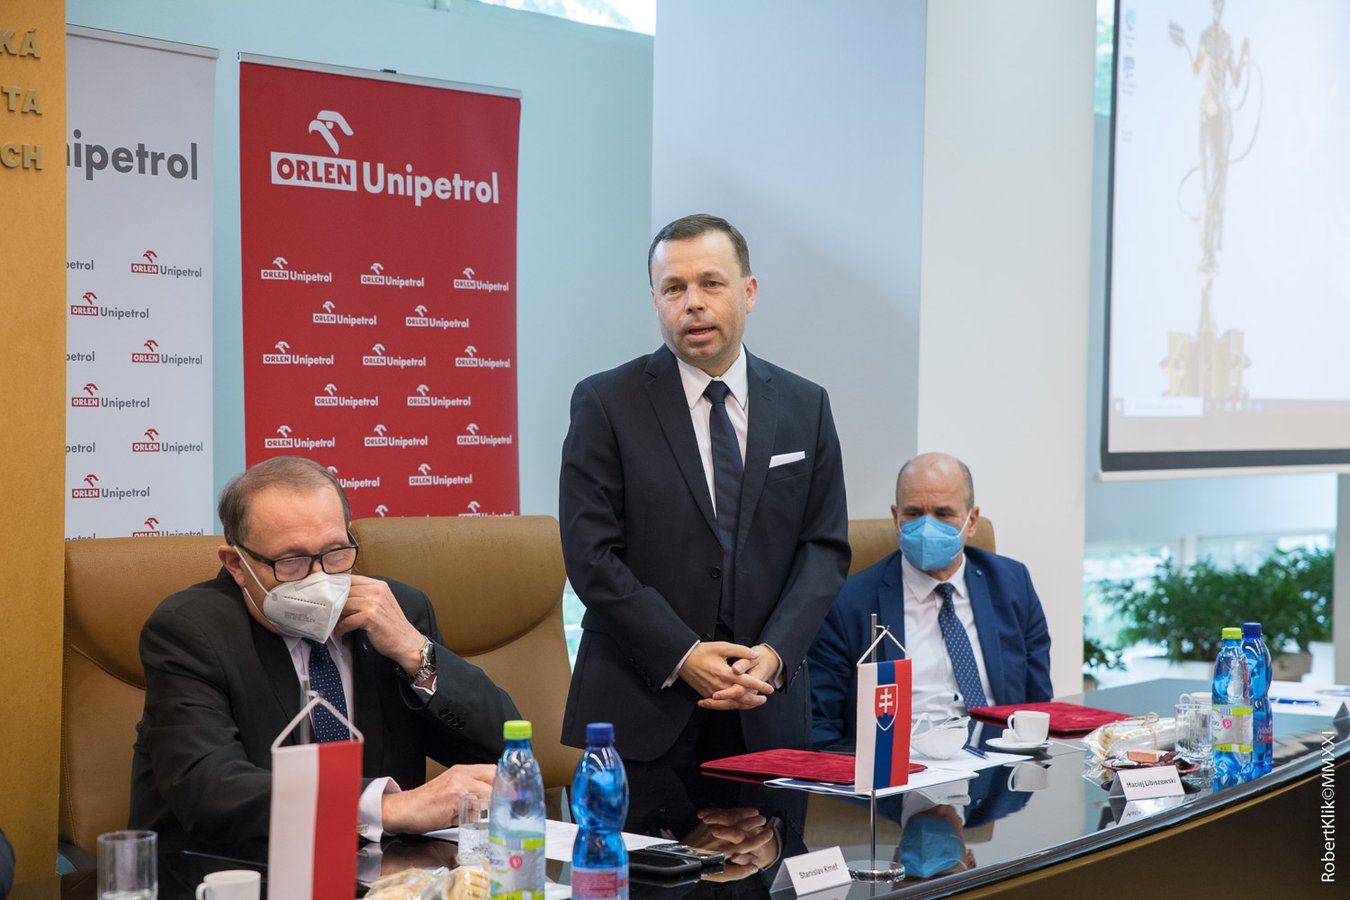 TUKE, ORLEN Unipetrol a.s., and ORLEN Unipetrol Slovakia s. r. o. signed a Memorandum of Understanding and Cooperation